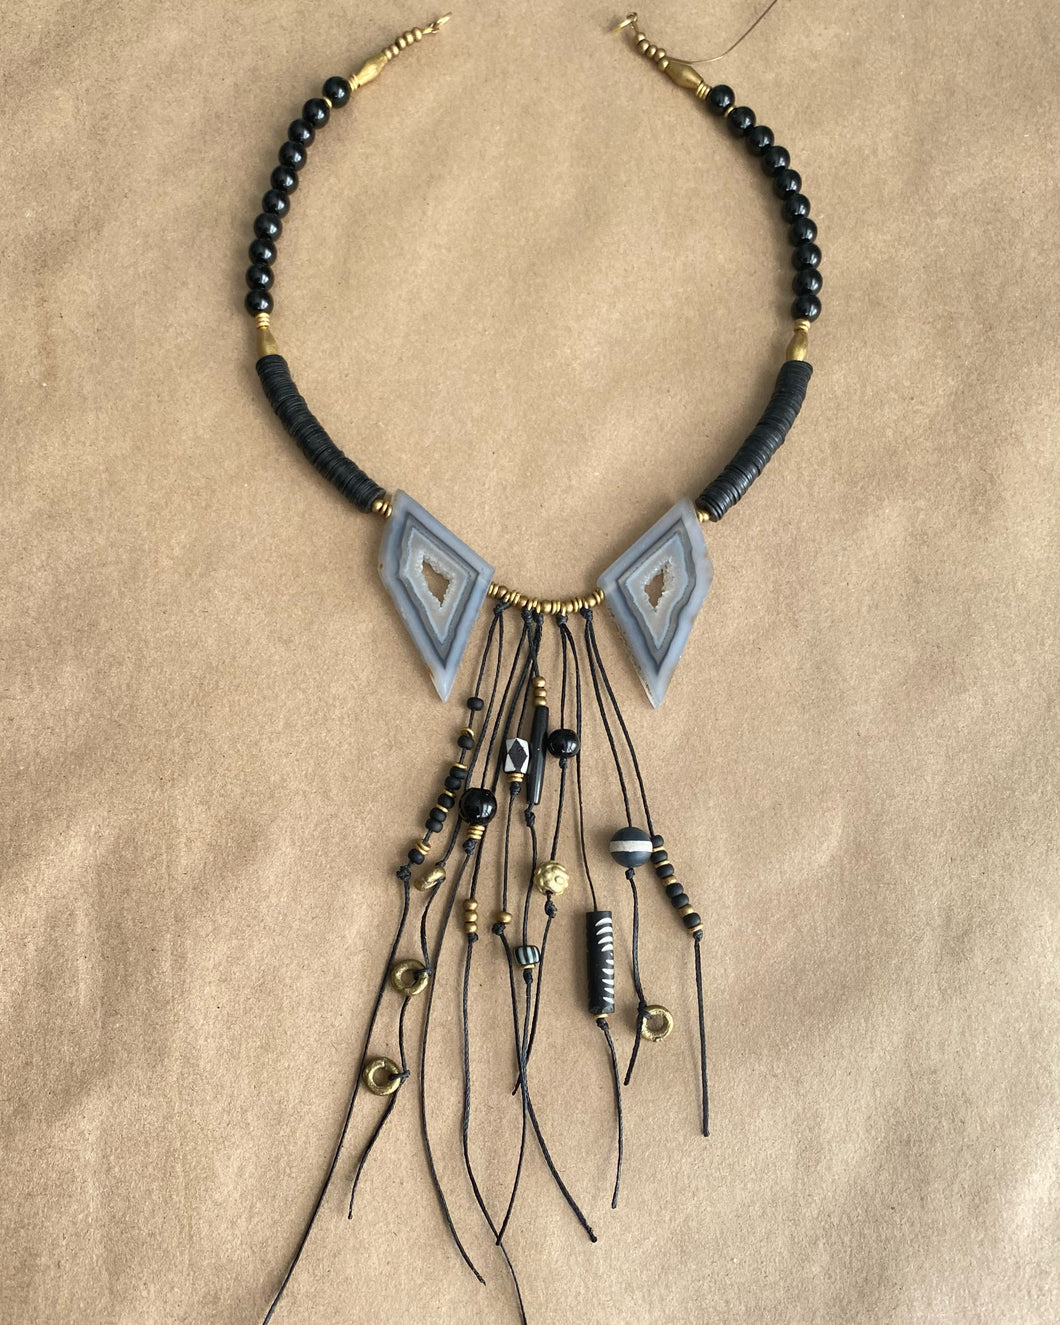 Polyhedral Agate Statement Necklace (Reserved)